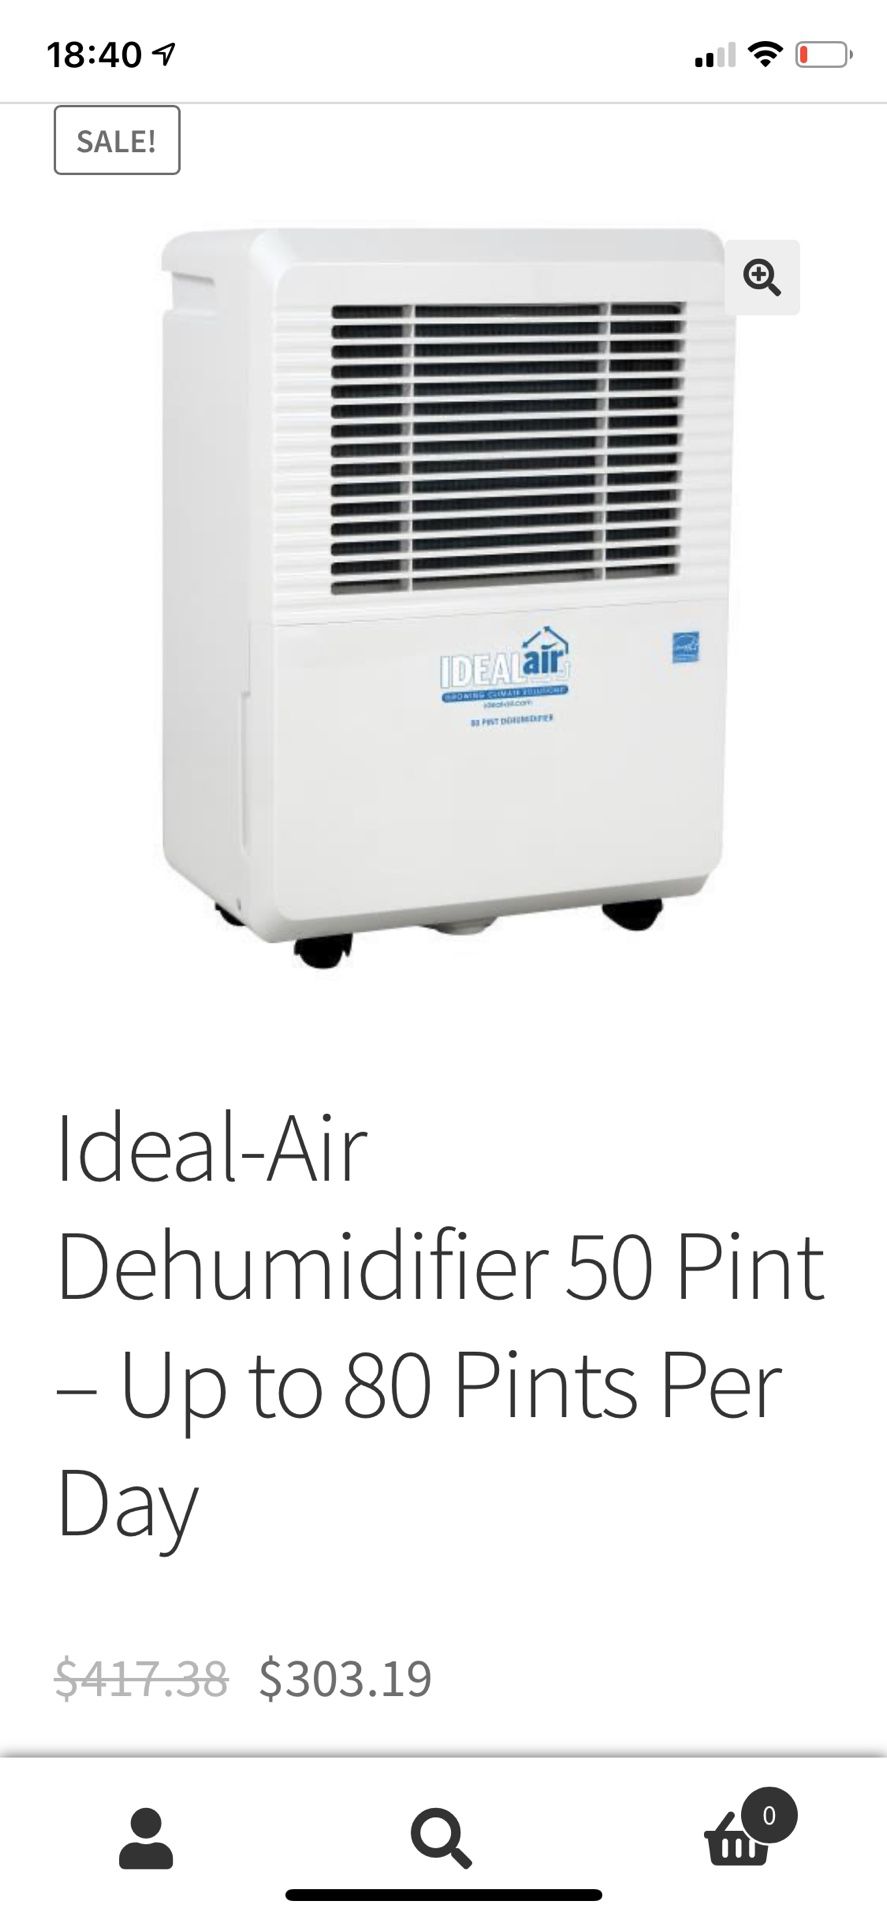 Ideal-Air Dehumidifier 50 Pint – Up to 80 Pints Per Day